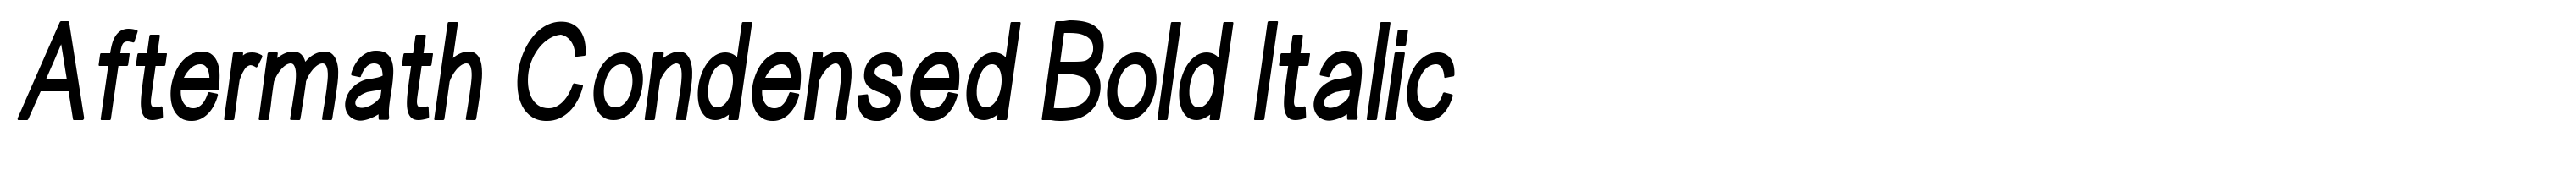 Aftermath Condensed Bold Italic